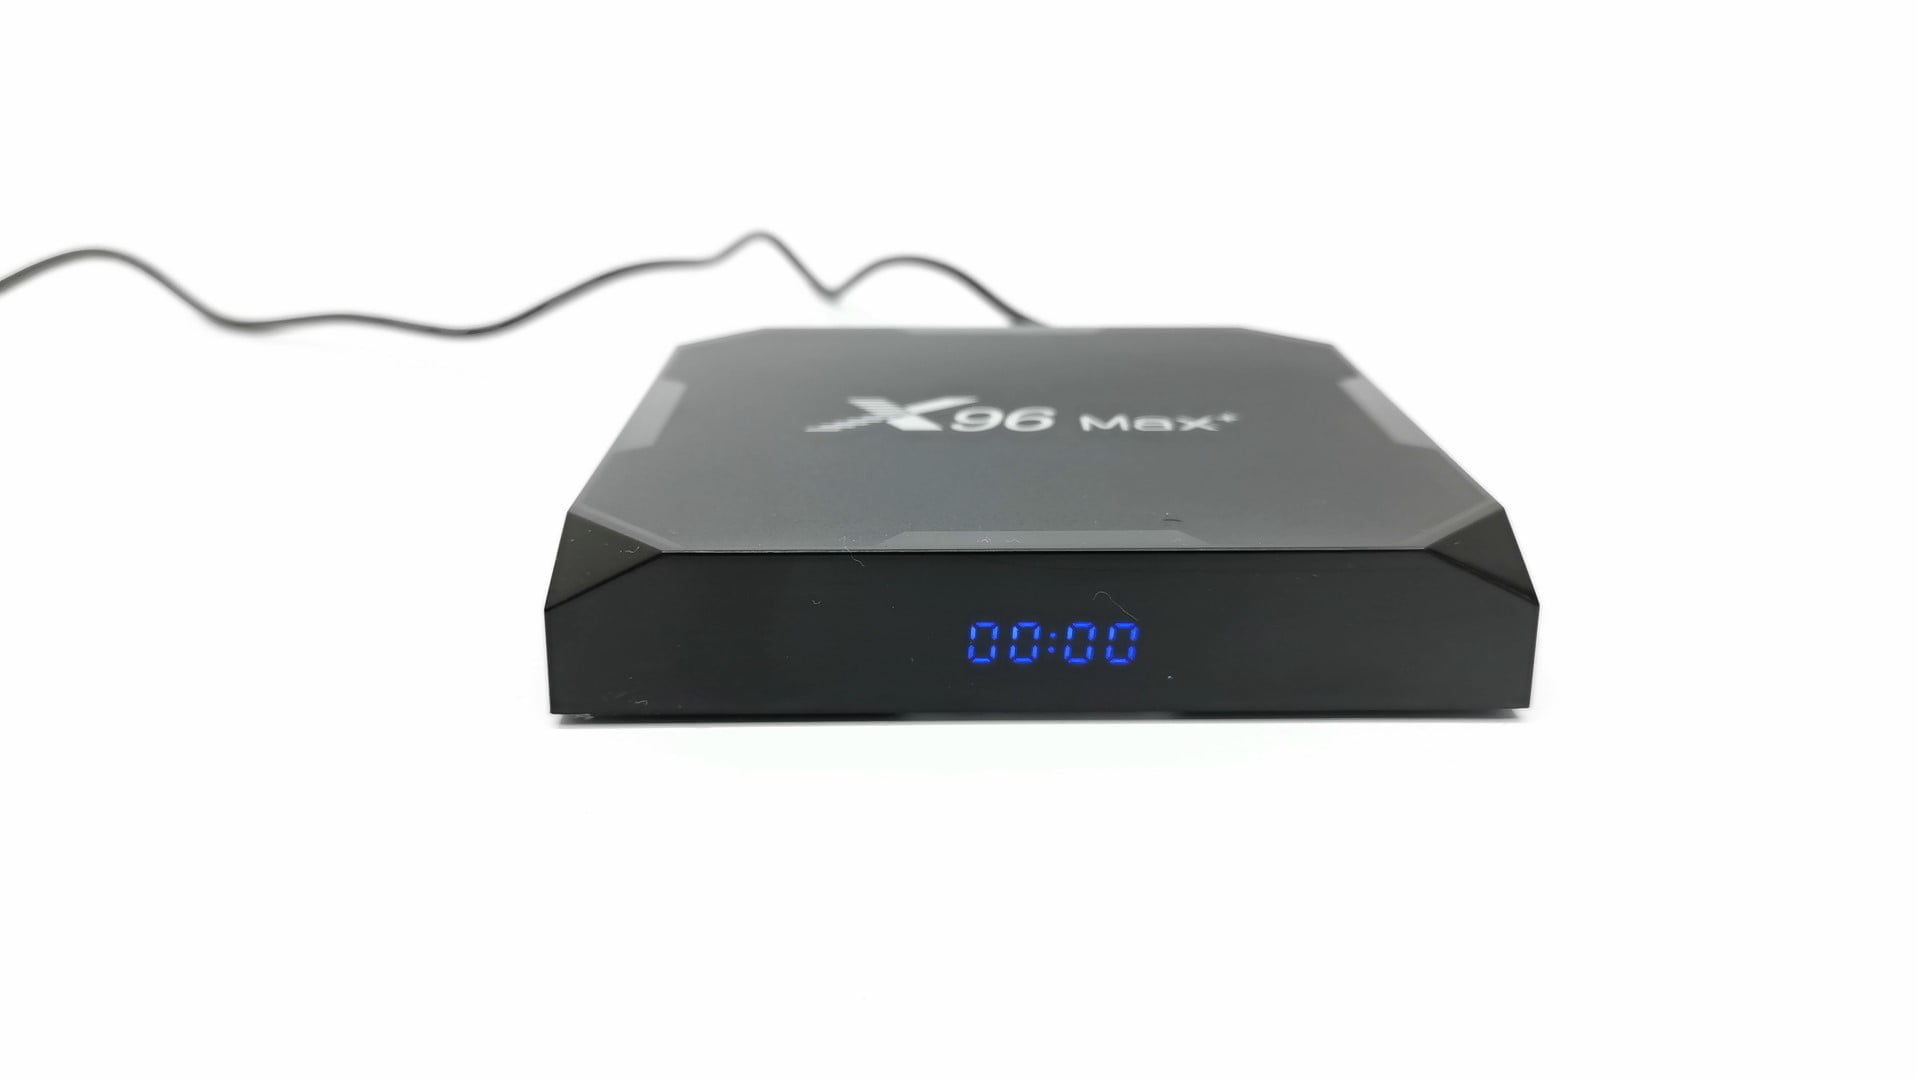 X96 Max Plus Ultra TV Box Review - What Does This Upgrade Hold For us